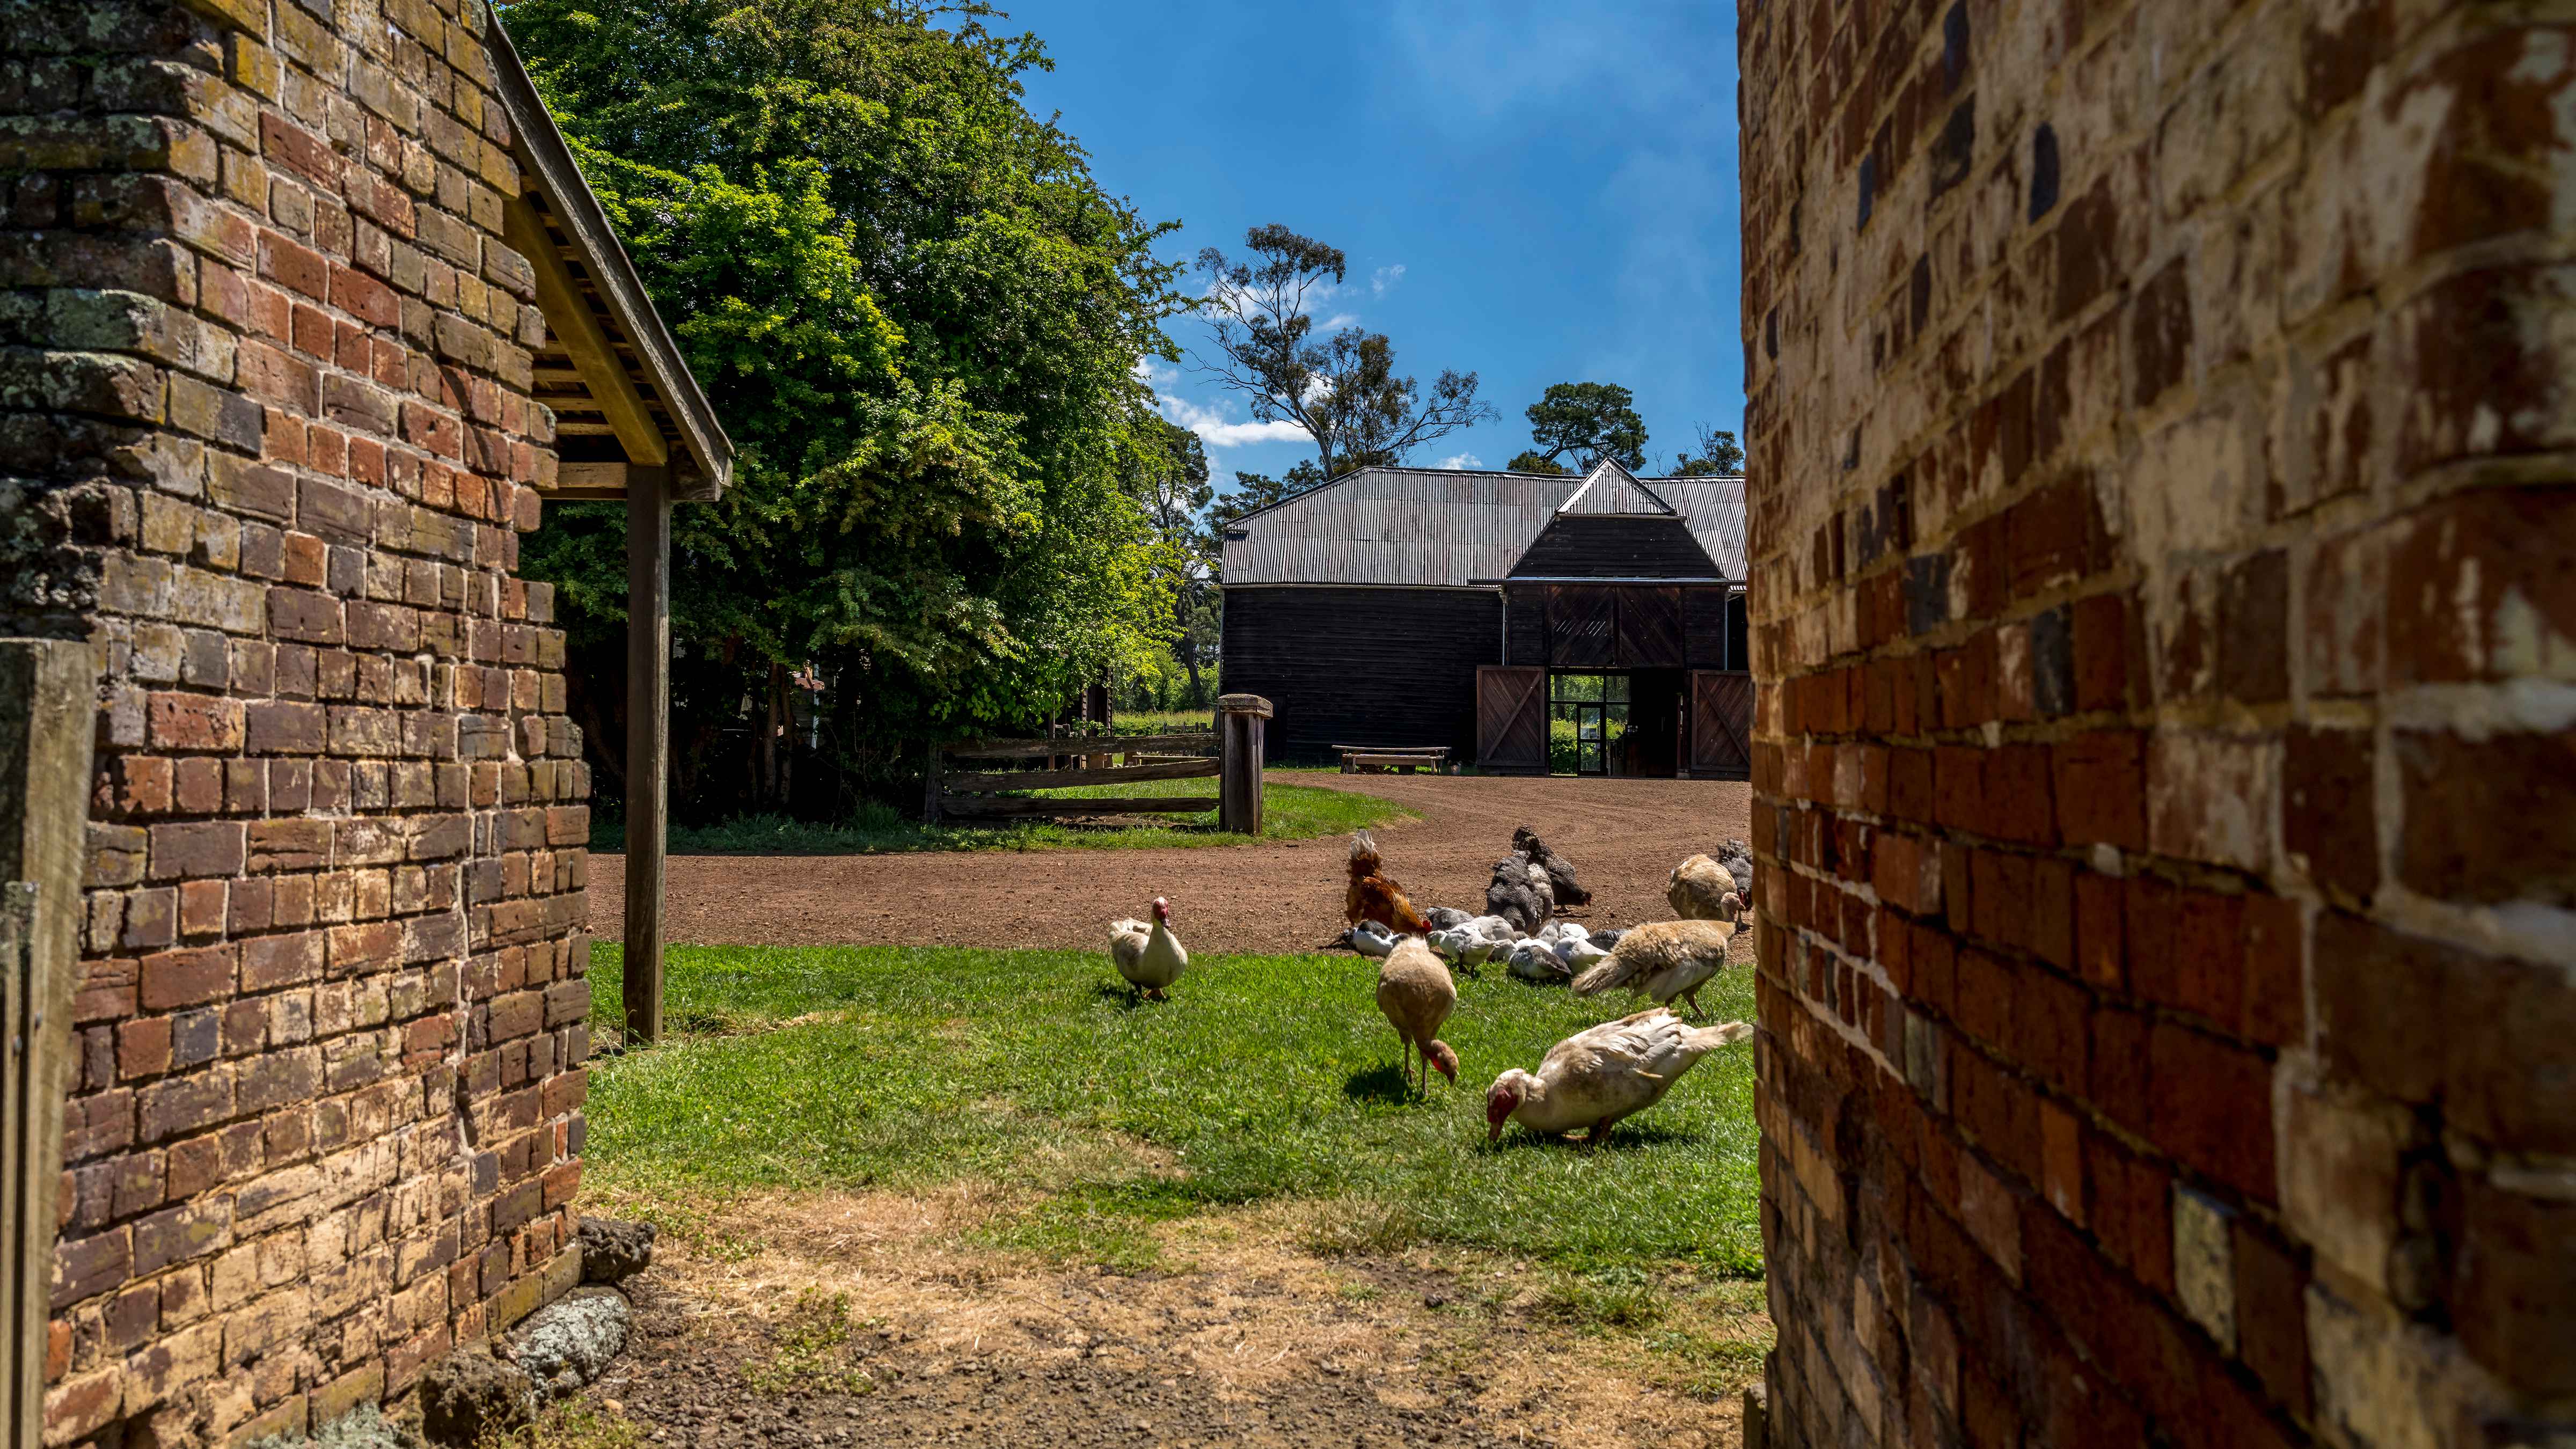 A view between the original cottage and smokehouse into the quadrangle with the Village barn in the background. Both of these buildings are constructed with bricks made on Brickendon during the 1820s. A group of ducks and turkeys graze in the foreground. Photo: Rob Burnett.